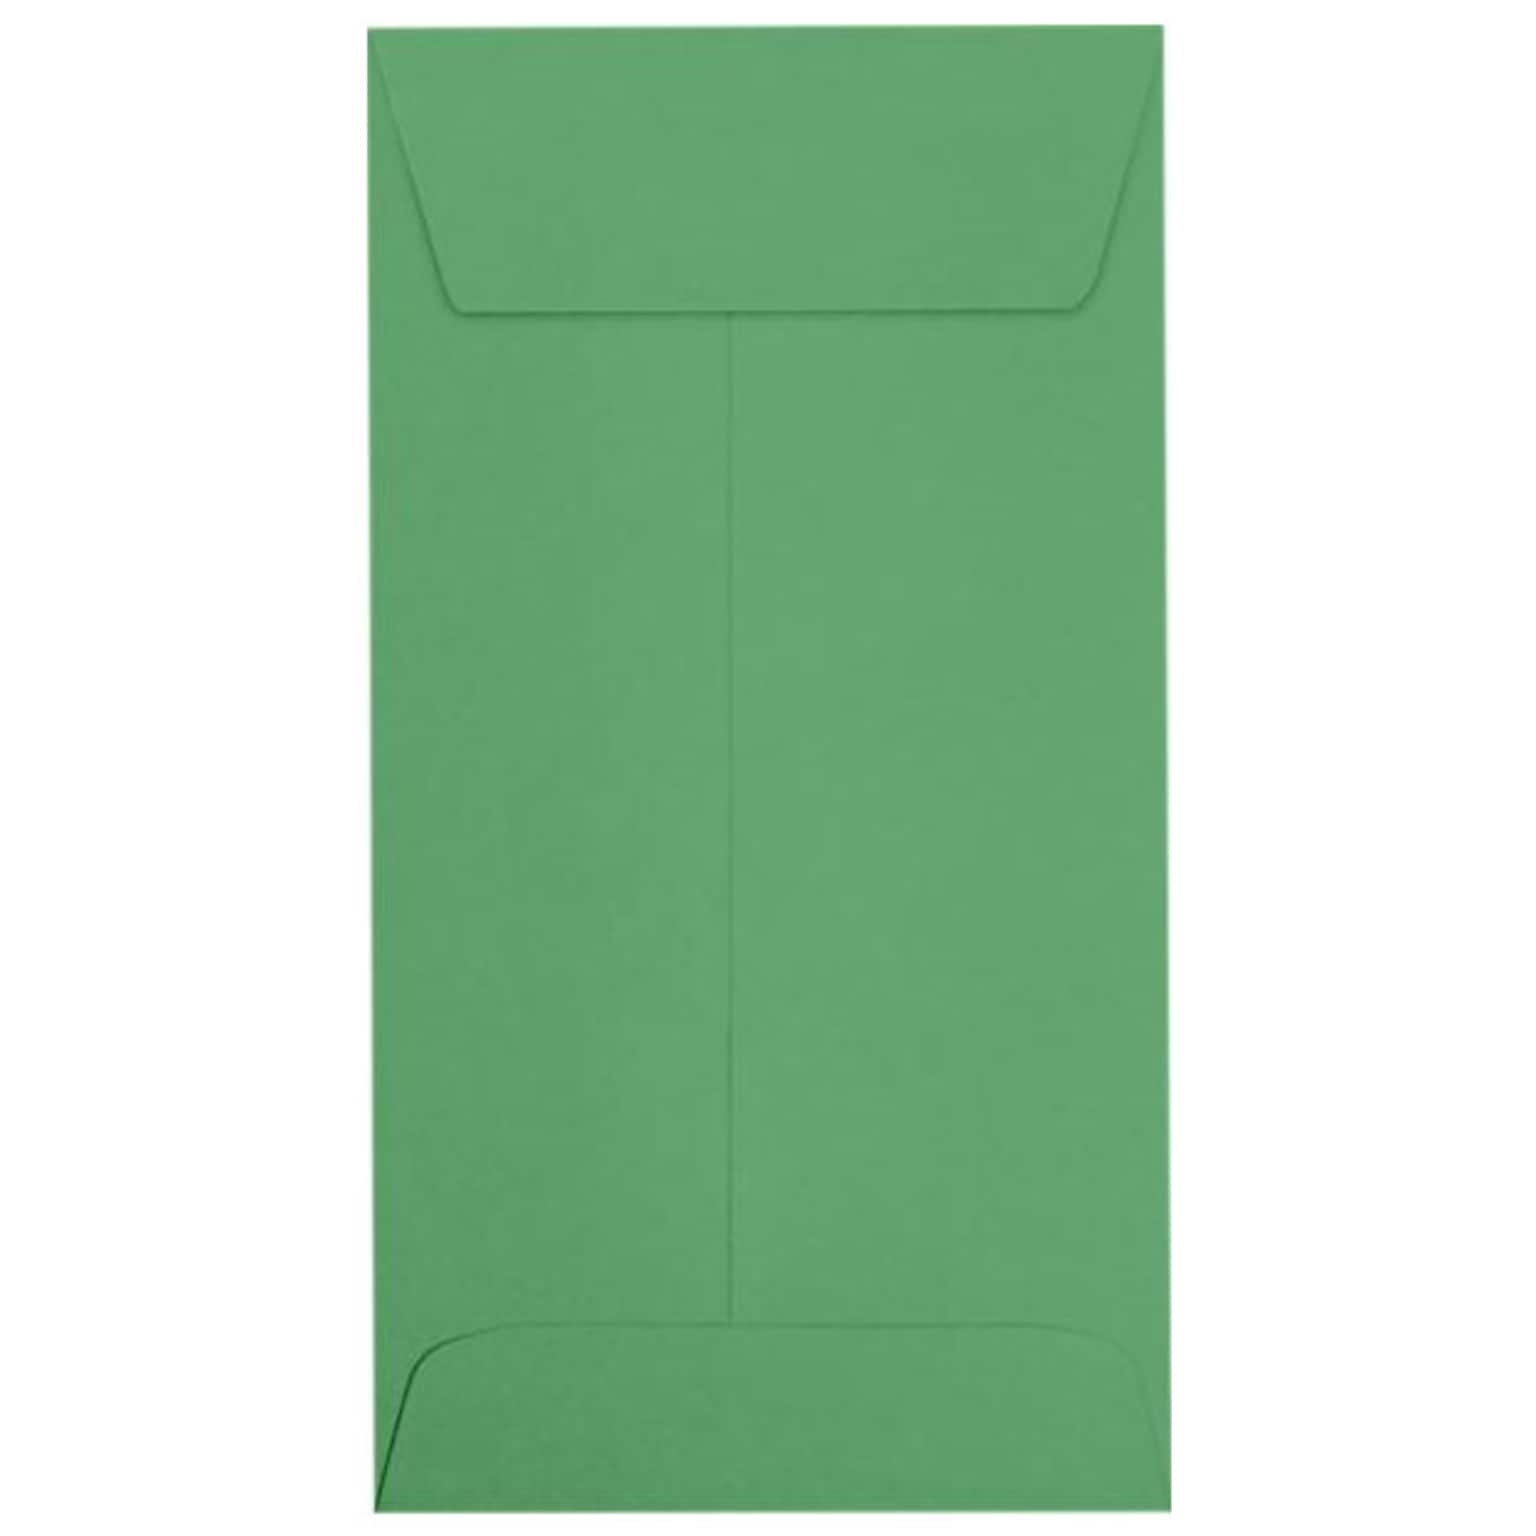 JAM Paper #7 Coin Envelopes, Peel & Press, Holiday Green, 3 1/2 x 6 1/2, 250 Pack (7CO-L17-250)